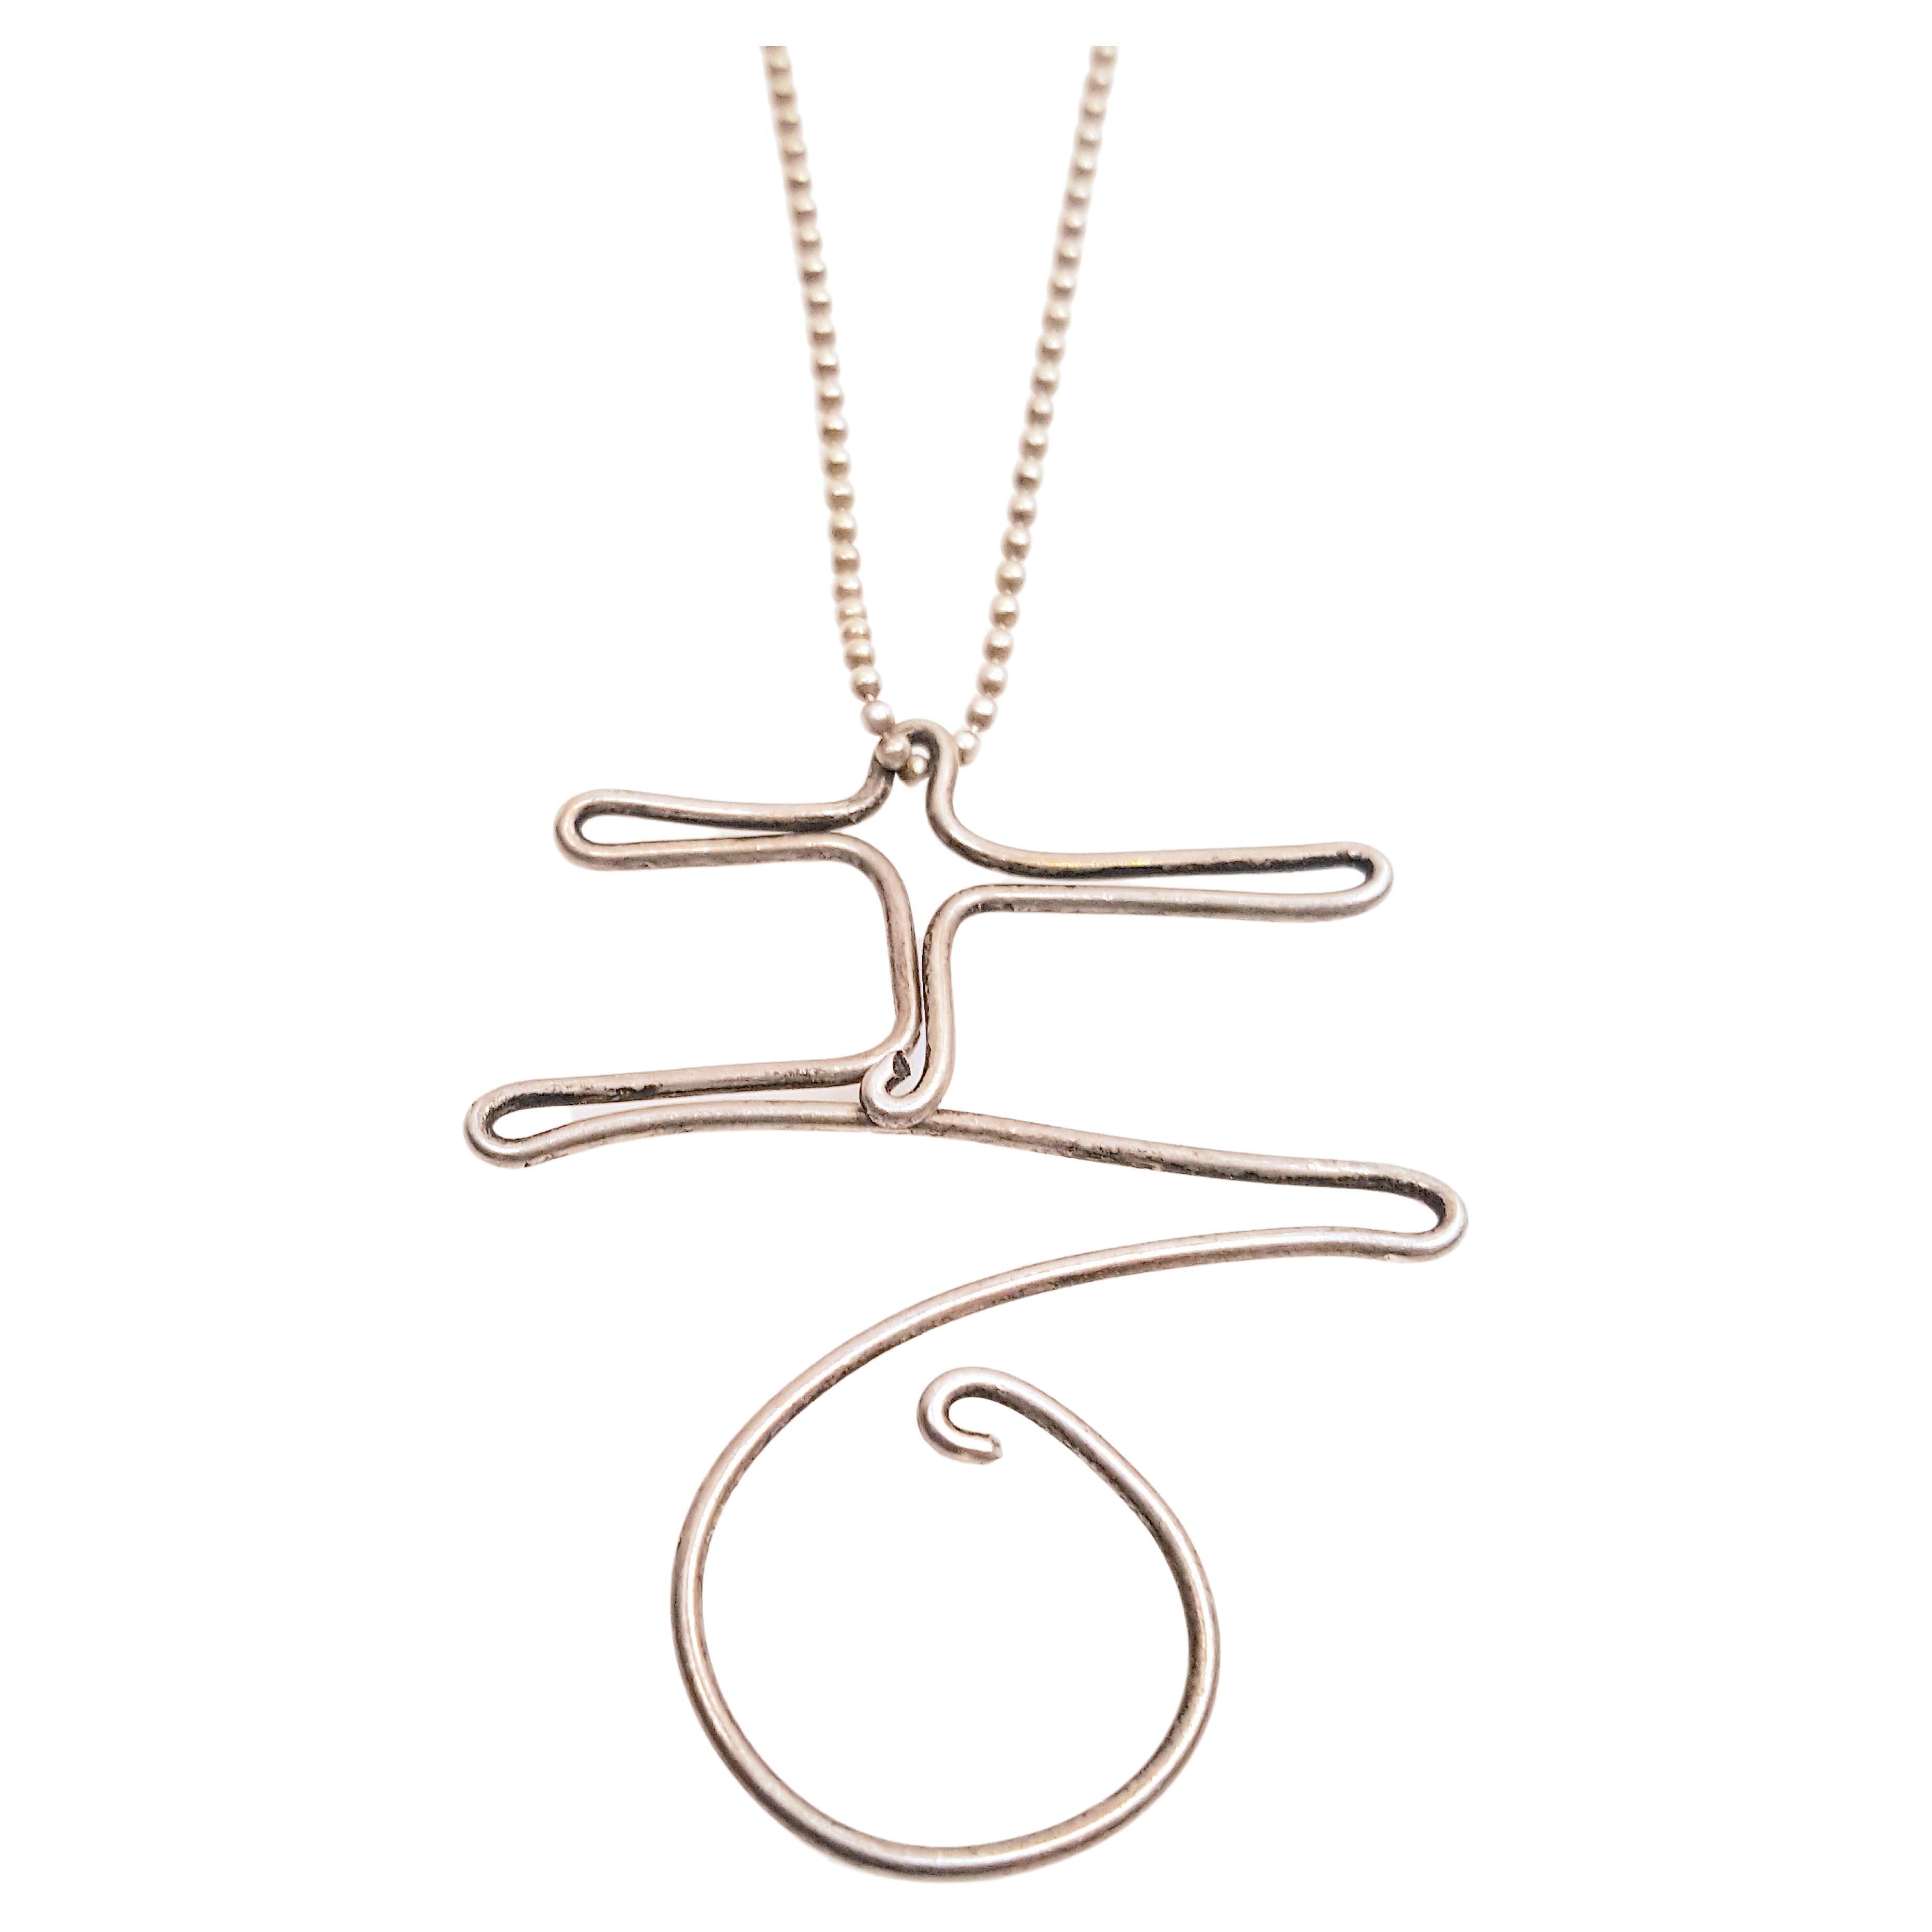 Like Alexander Calder's handmade wire jewelry since 1929, whose smallest one-of-a-kind sculptural subjects ranged from aerial acrobats and dancers to monograms with letters representing a friend, this modern minimal sterling-silver wire pendant was